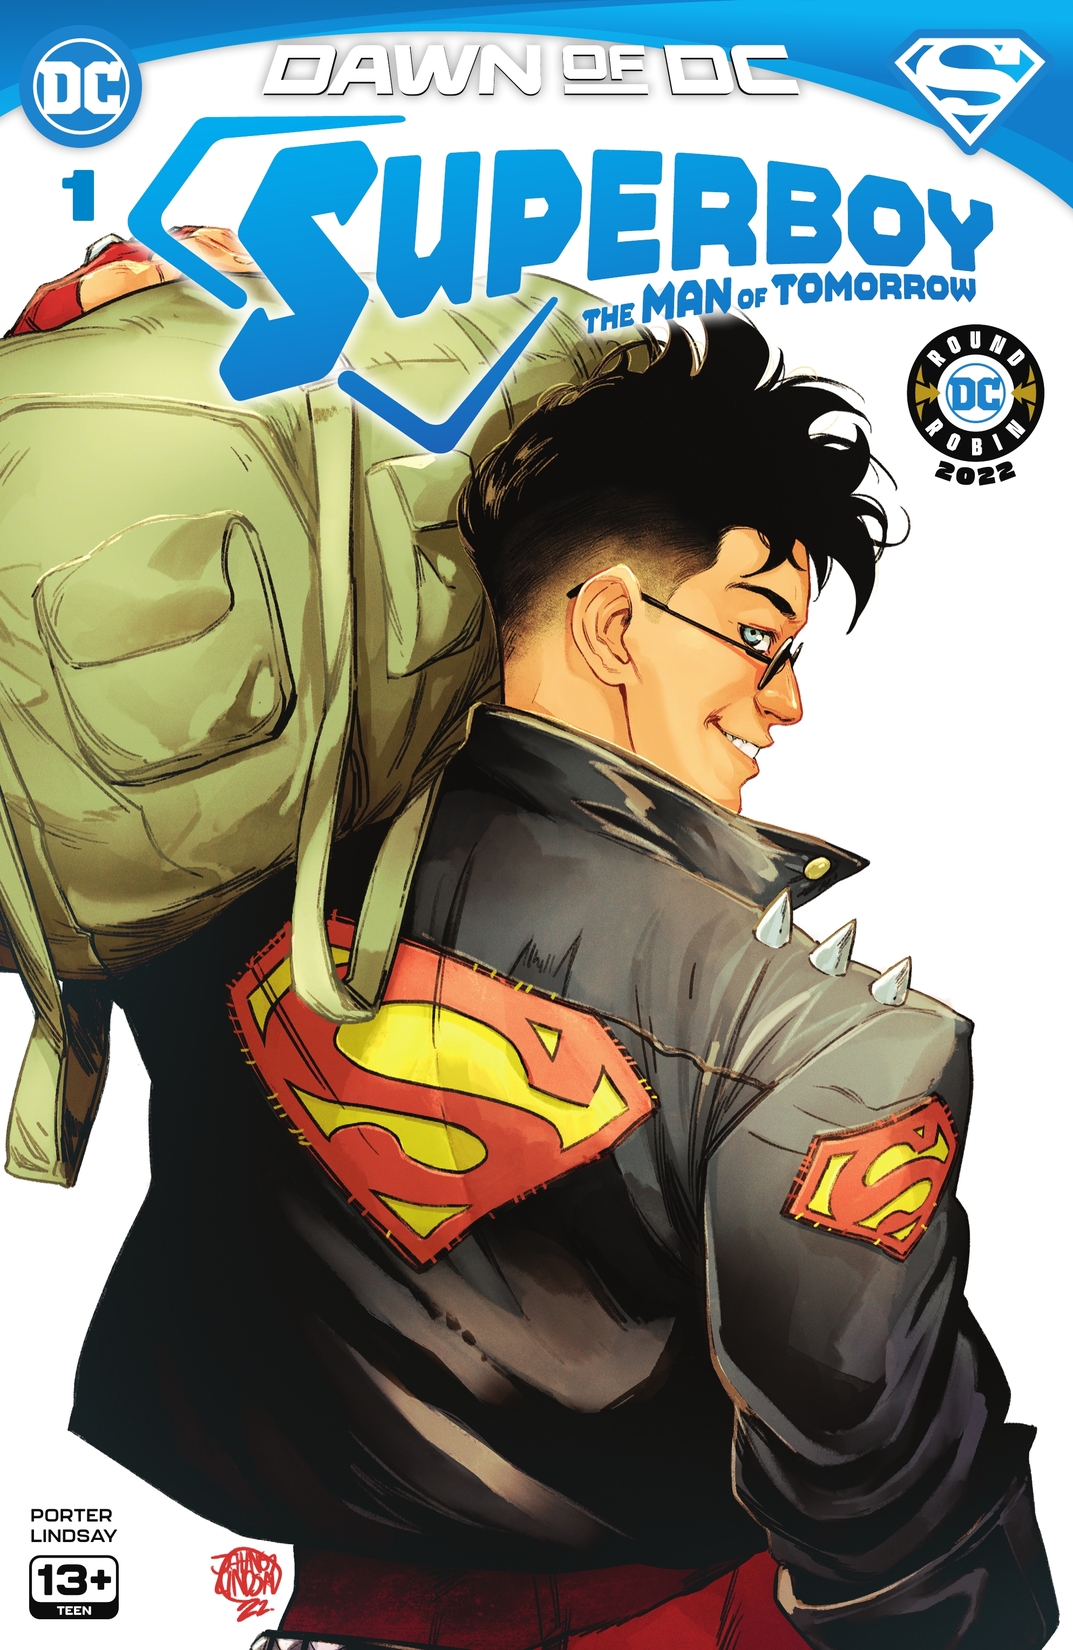 Superboy: The Man Of Tomorrow #1 preview images